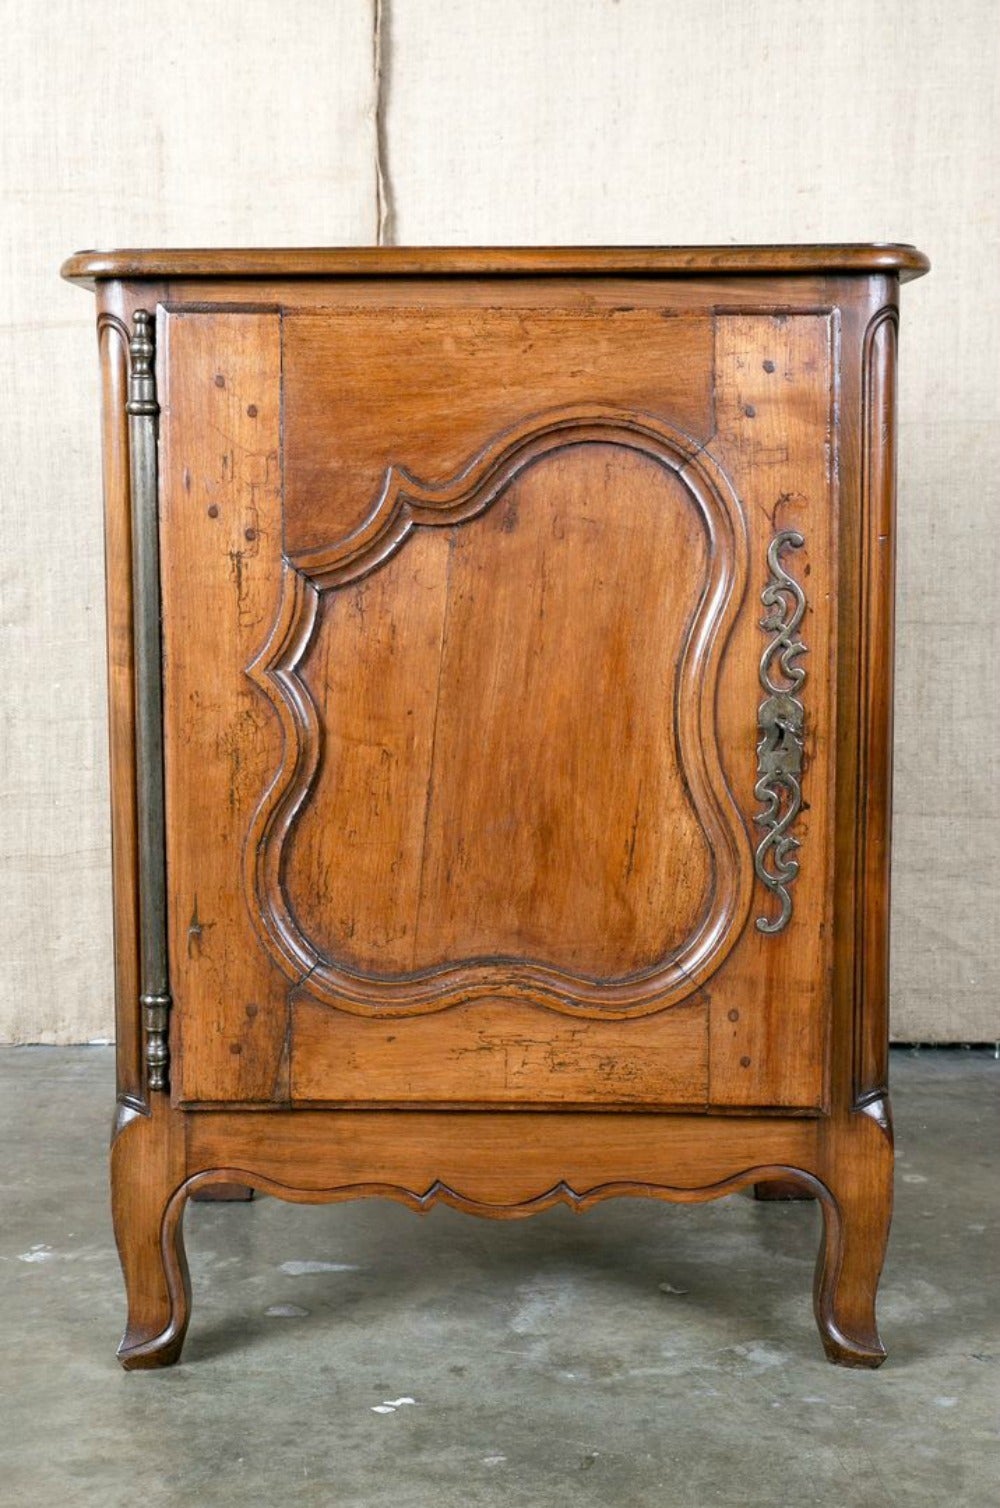 Antique French Country Louis XV style confiturier (jam holder) from Normandie. Handcrafted of cherry wood featuring a single paneled door with unusual full hinge above a carved apron. Raised on short cabriole legs. Single interior shelf.